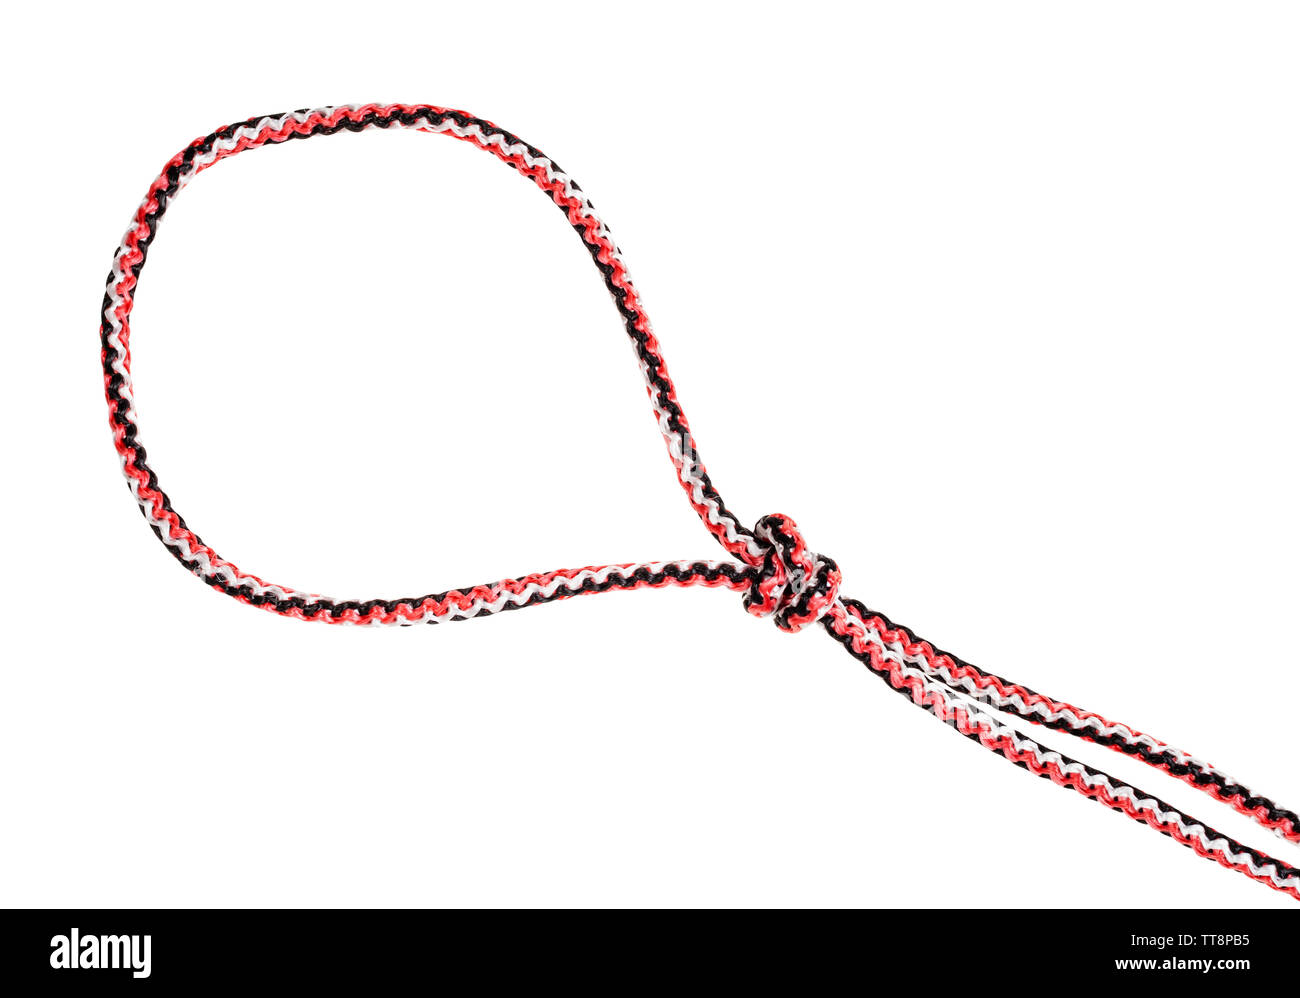 loop of strangle snare knot tied on synthetic rope cut out on white background Stock Photo